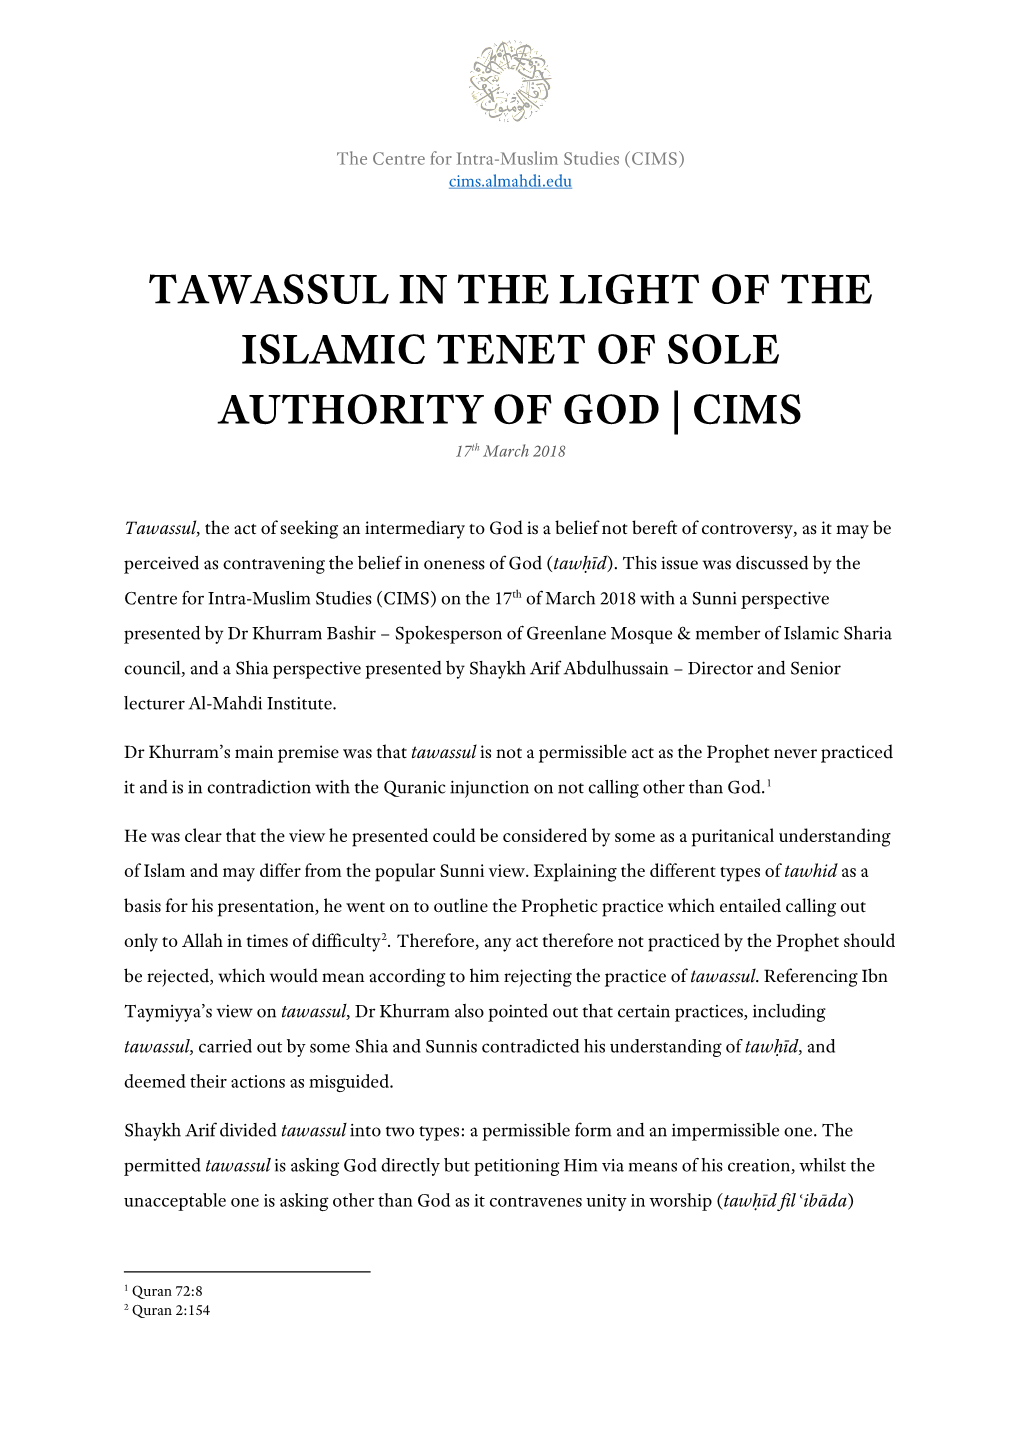 TAWASSUL in the LIGHT of the ISLAMIC TENET of SOLE AUTHORITY of GOD | CIMS 17Th March 2018